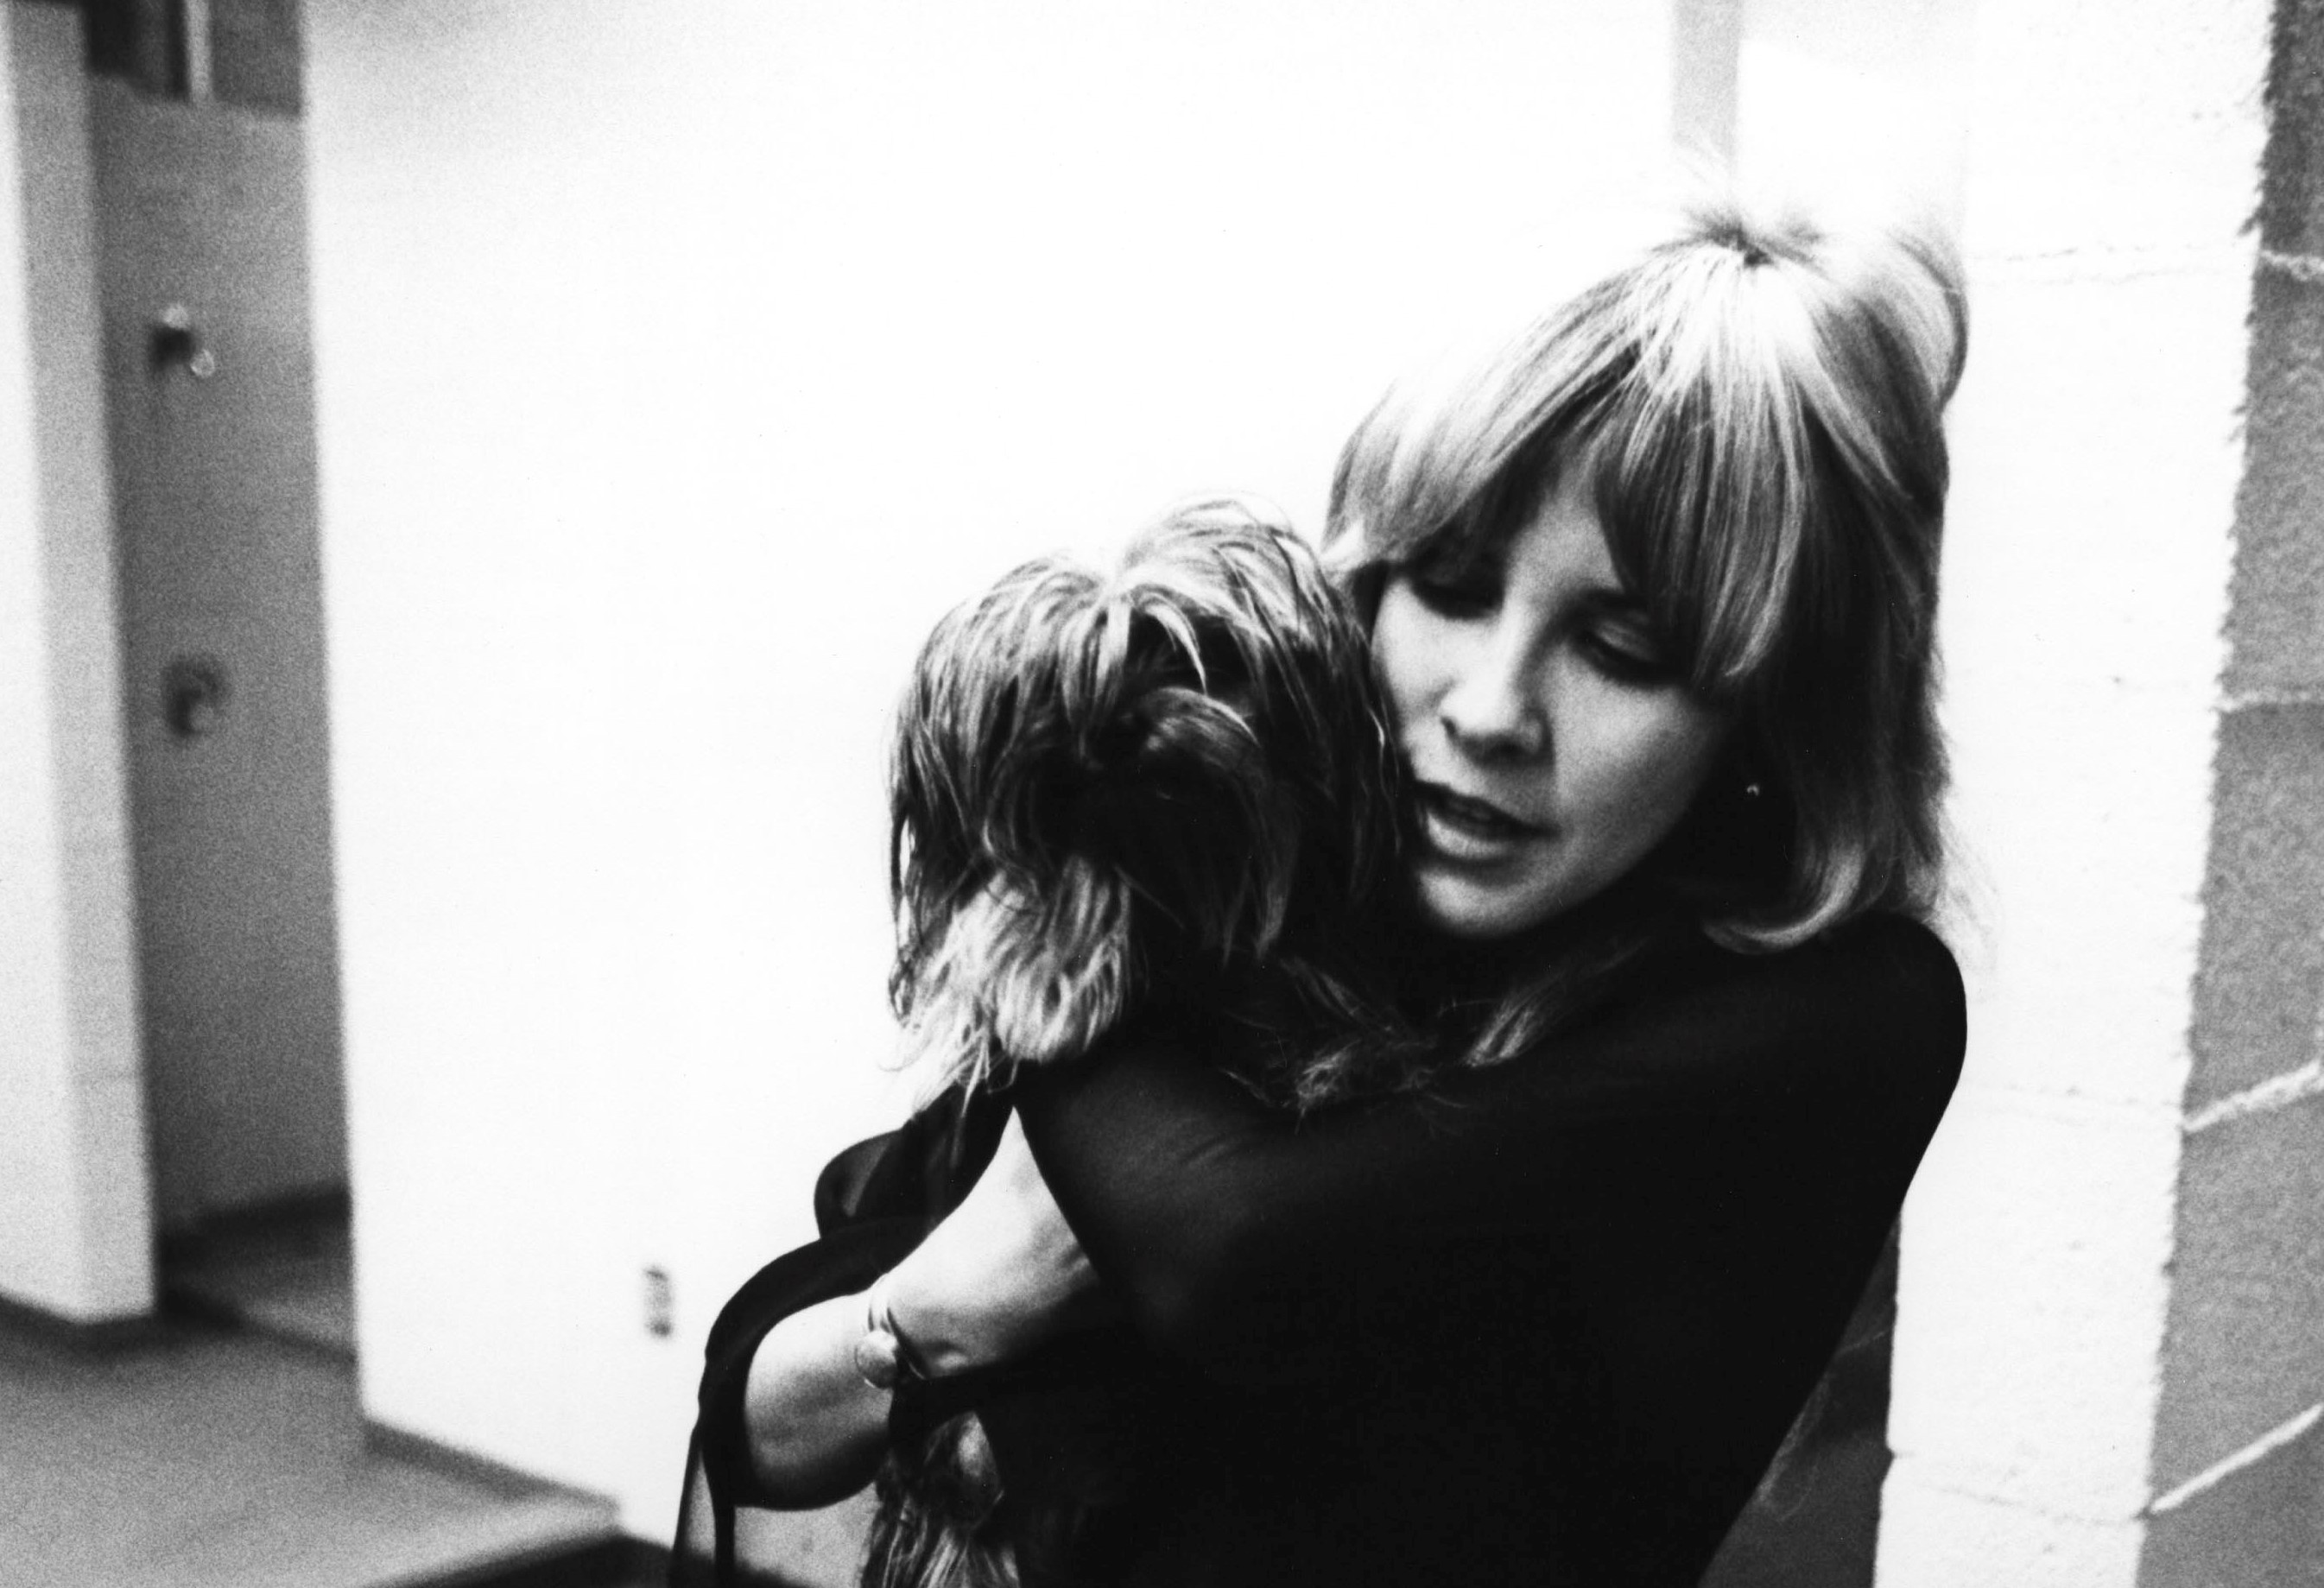 Stevie Nicks in a black top holding a dog.